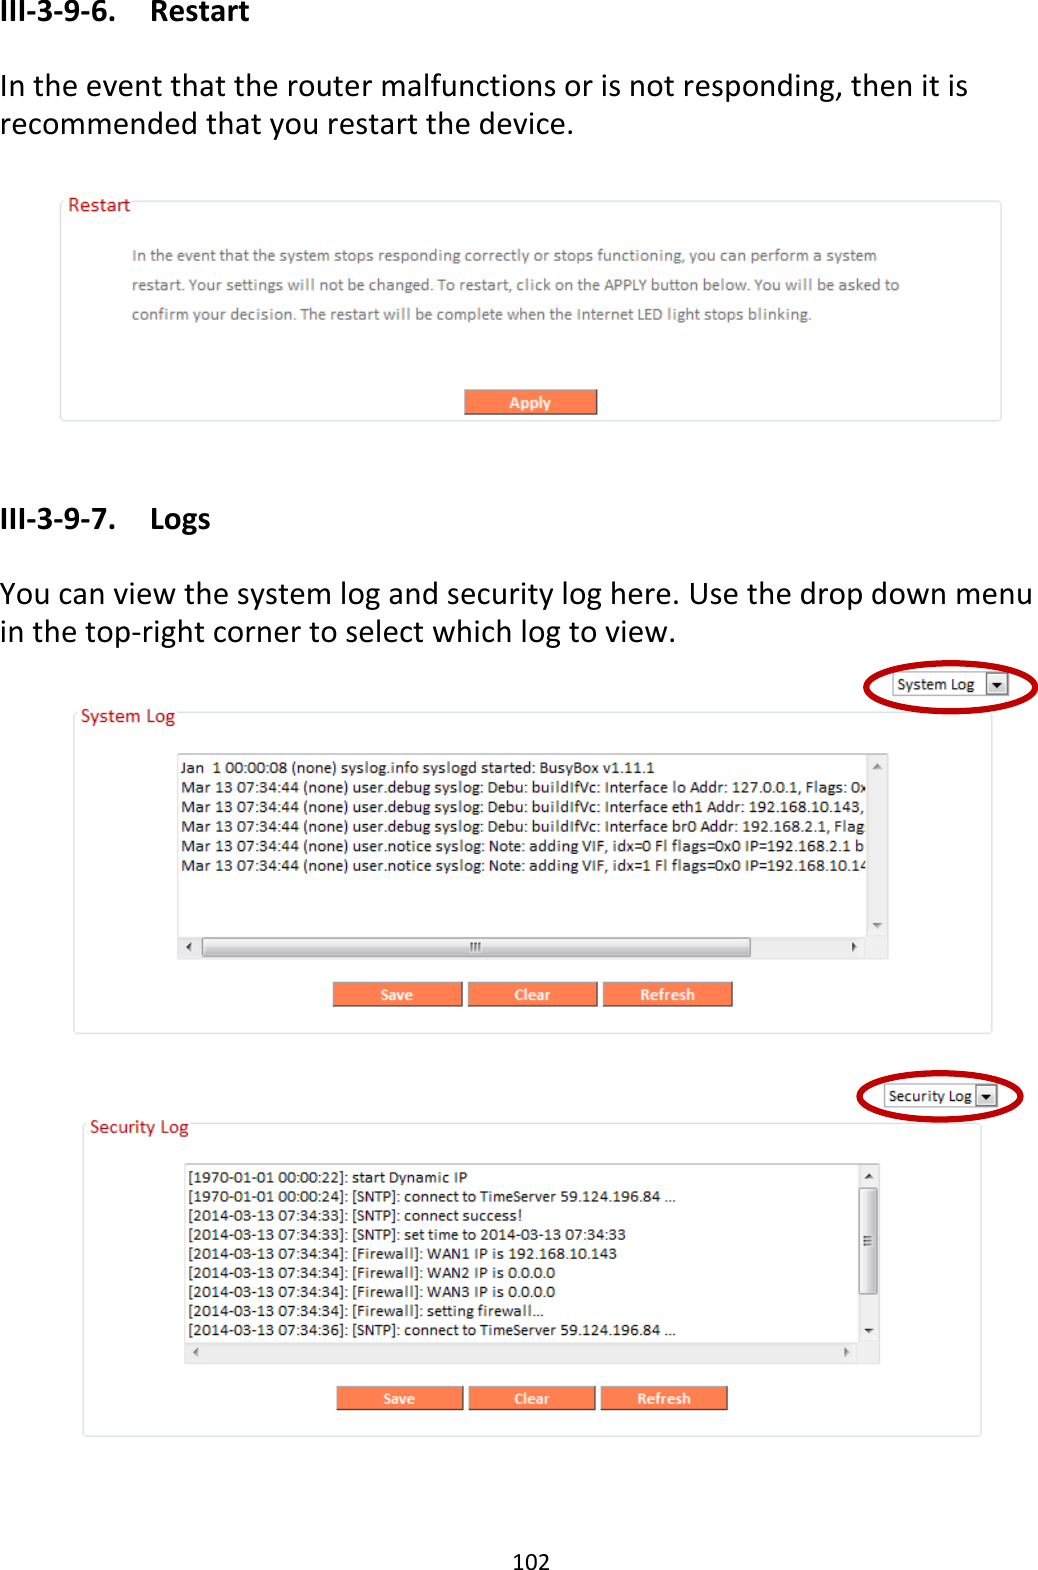 102 III-3-9-6.  Restart  In the event that the router malfunctions or is not responding, then it is recommended that you restart the device.    III-3-9-7.  Logs  You can view the system log and security log here. Use the drop down menu in the top-right corner to select which log to view.      